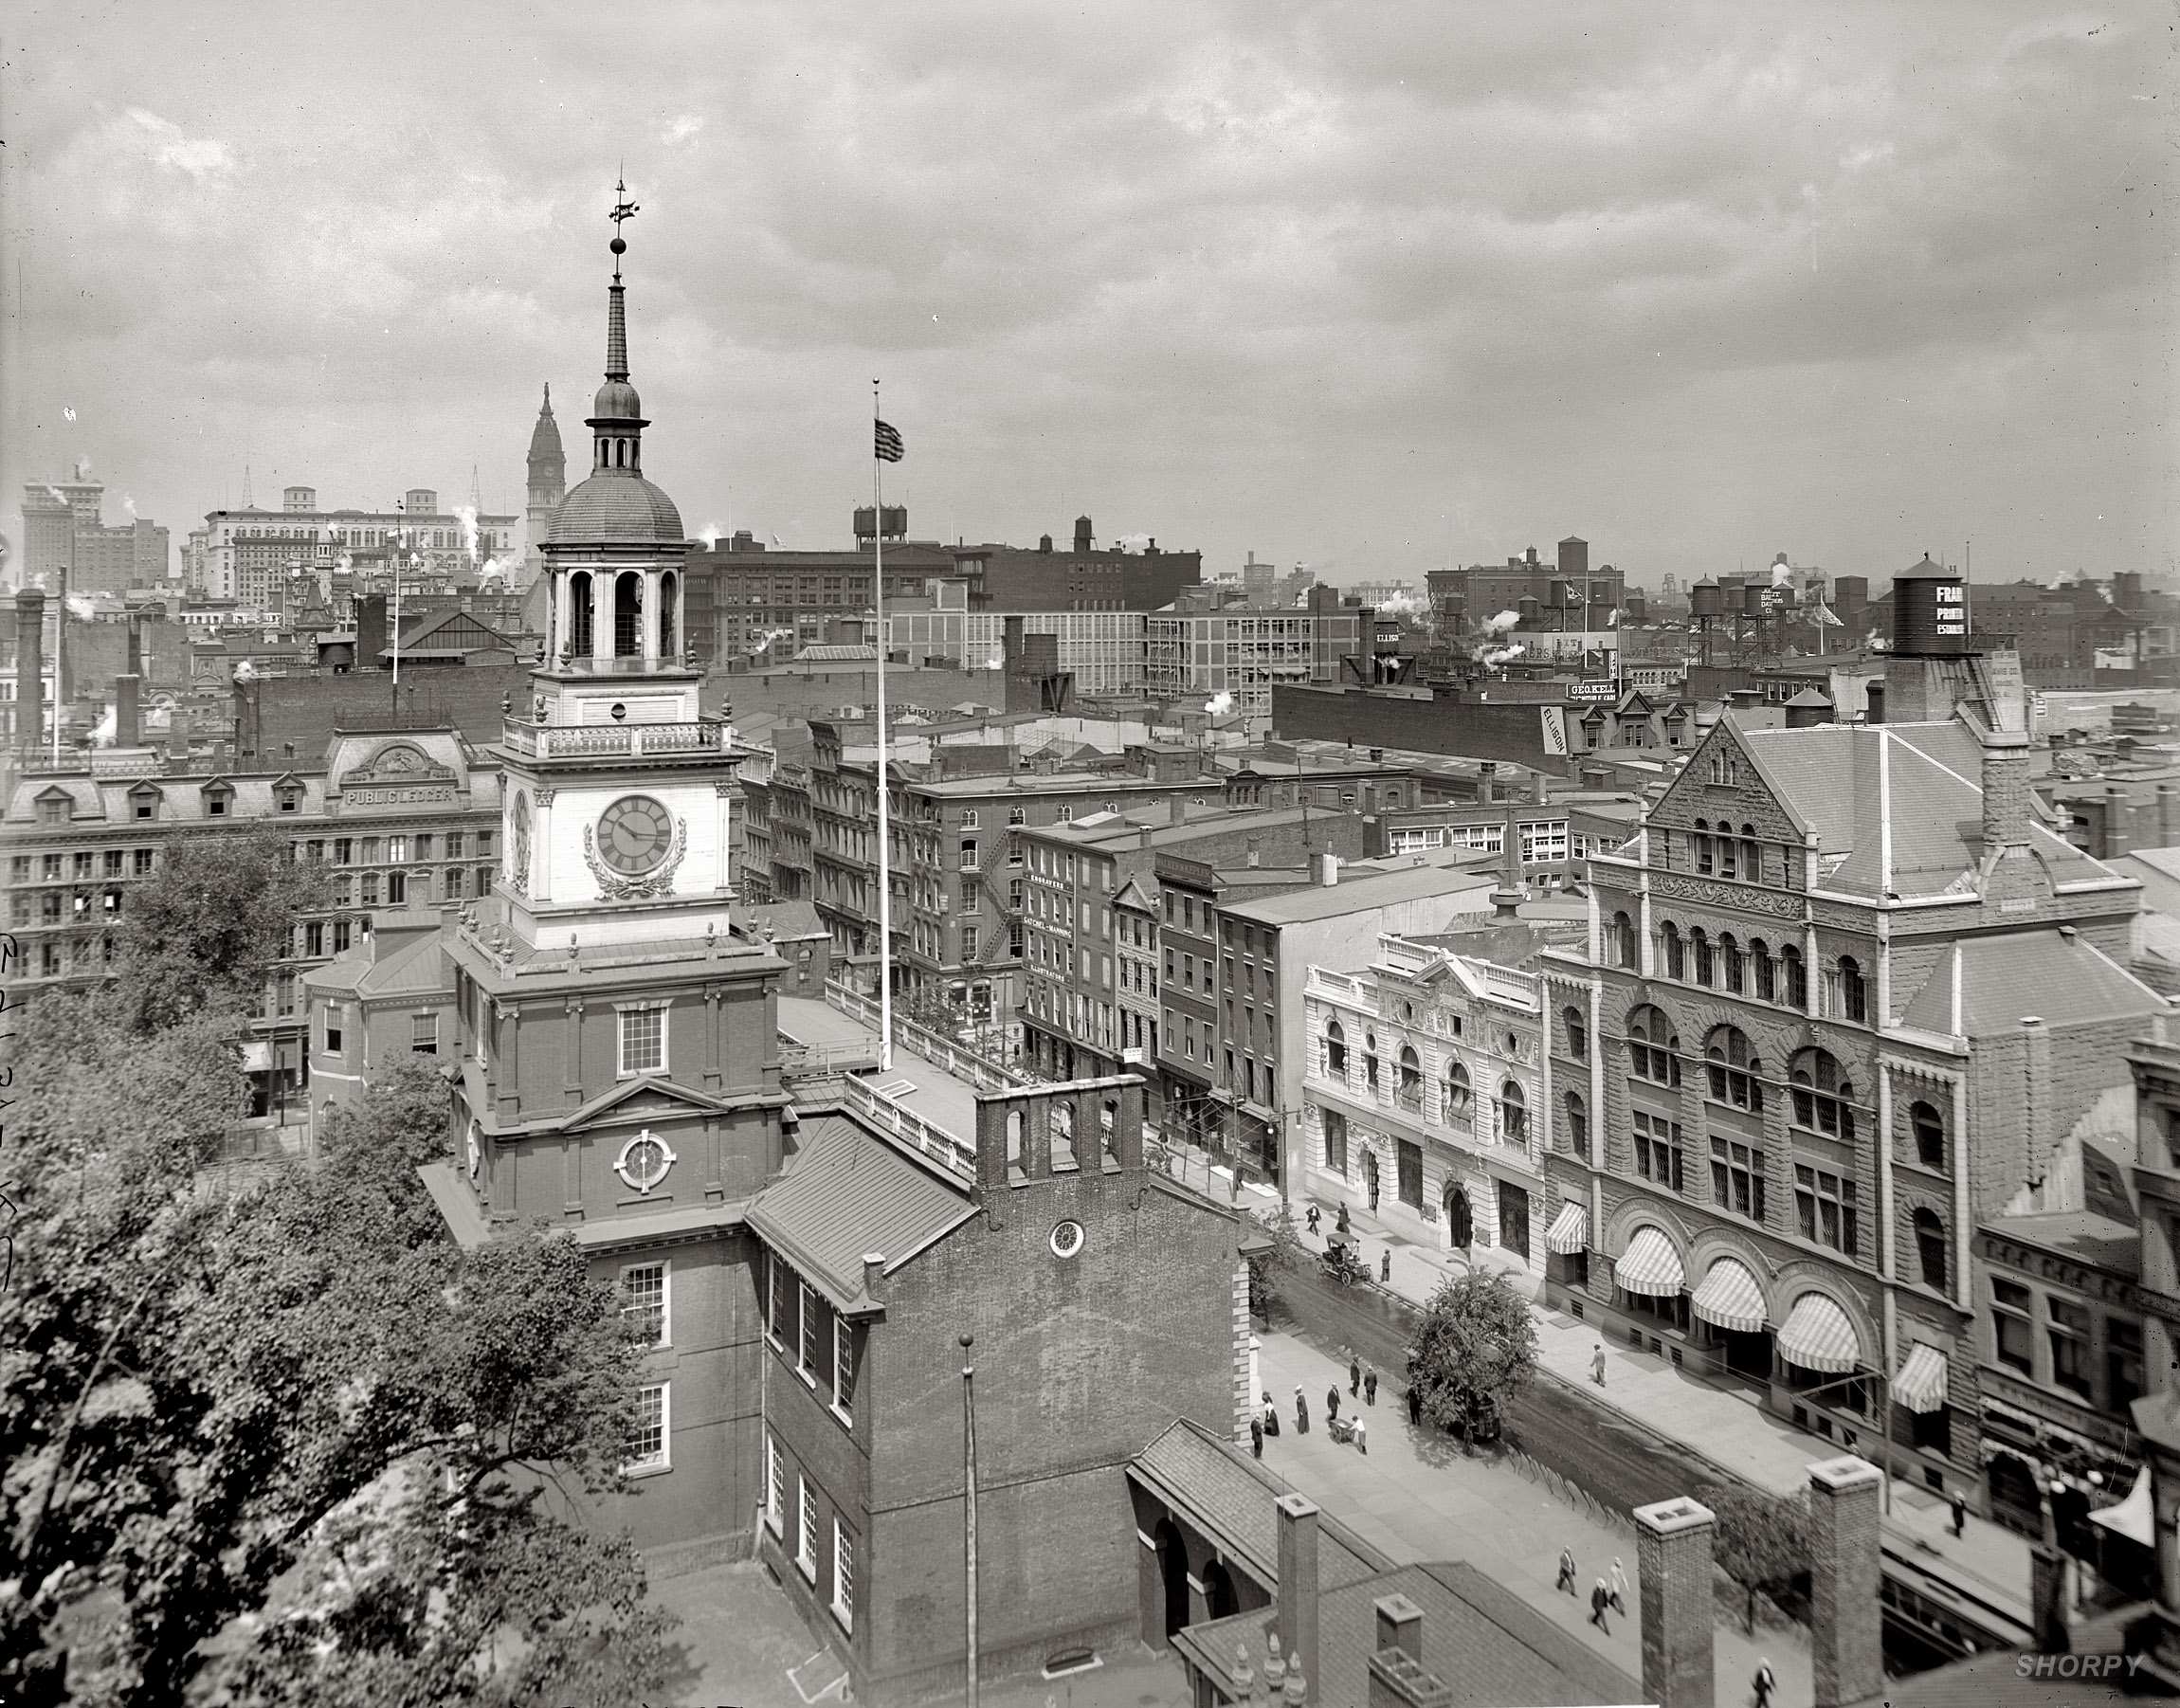 "Independence Hall at Independence Square, Philadelphia, c. 1910-1915." 8x10 glass negative, Detroit Publishing Company, Library of Congress. View full size.